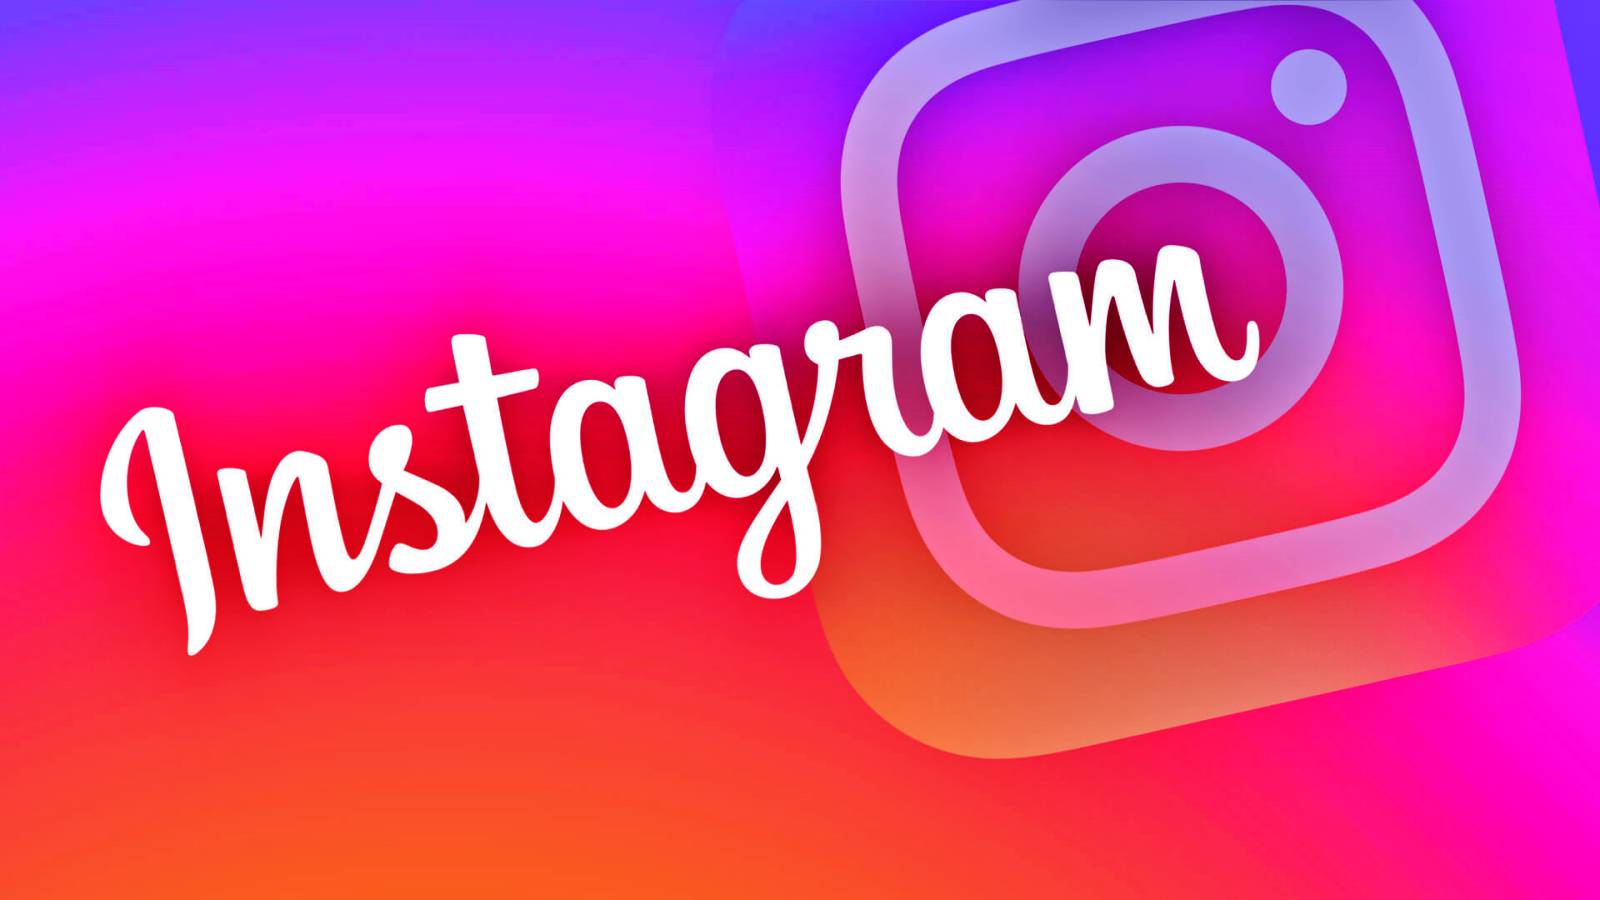 Instagram Update for iPhone and Android comes today with news